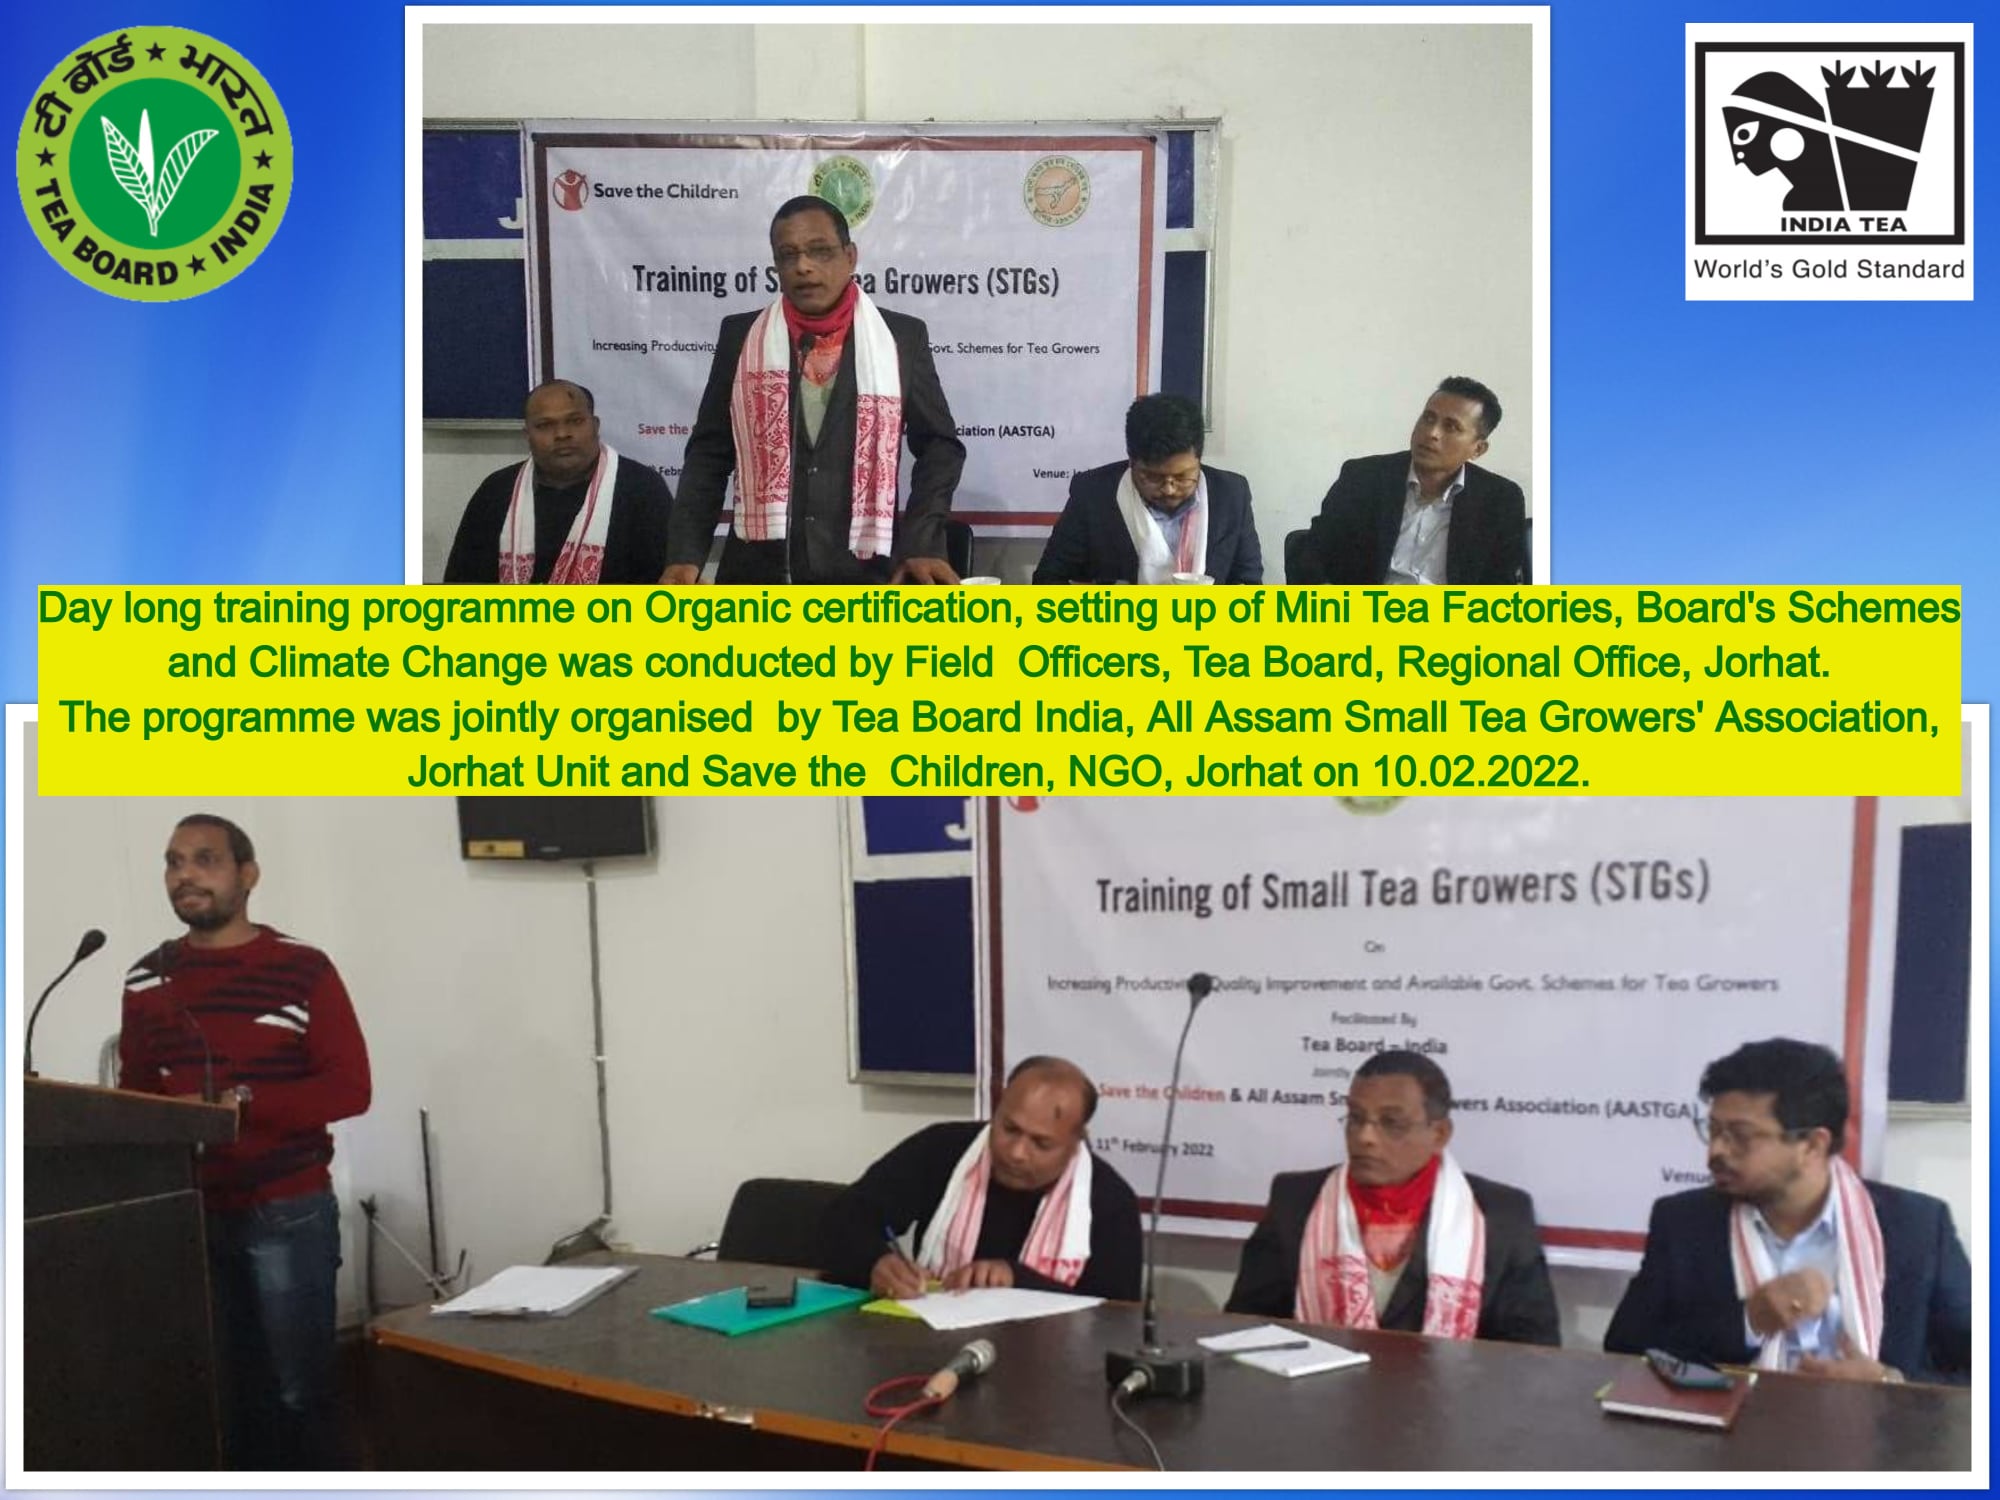 Day long training programme on Organic certification, setting up of Mini Tea Factories, Board's Schemes and Climate Change conducted Tea Board, Regional Office, Jorhat, 10-02-2022